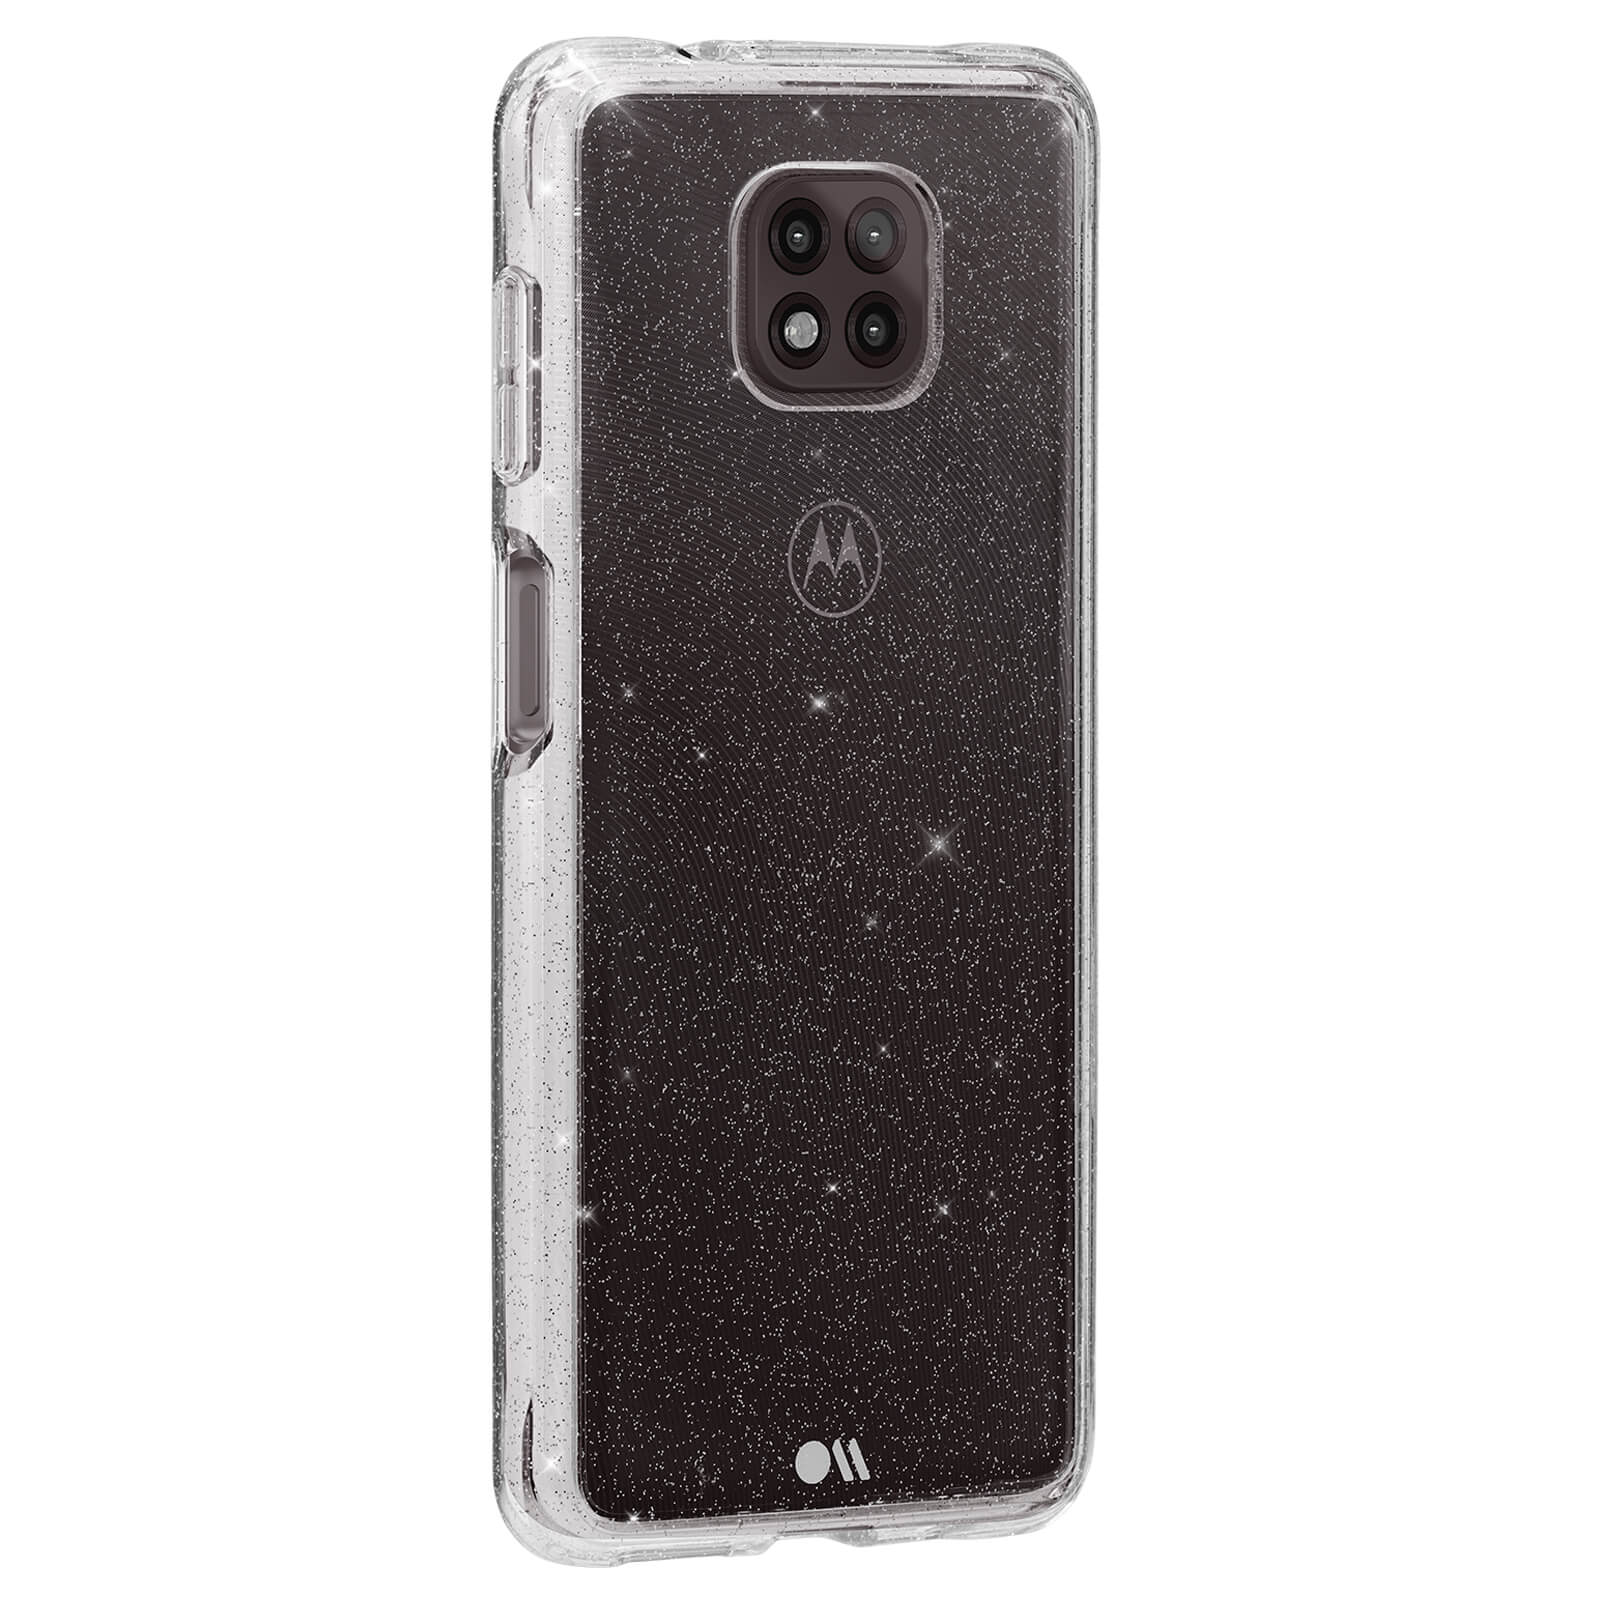 Sparkly clear case for Moto g Power. color::Clear